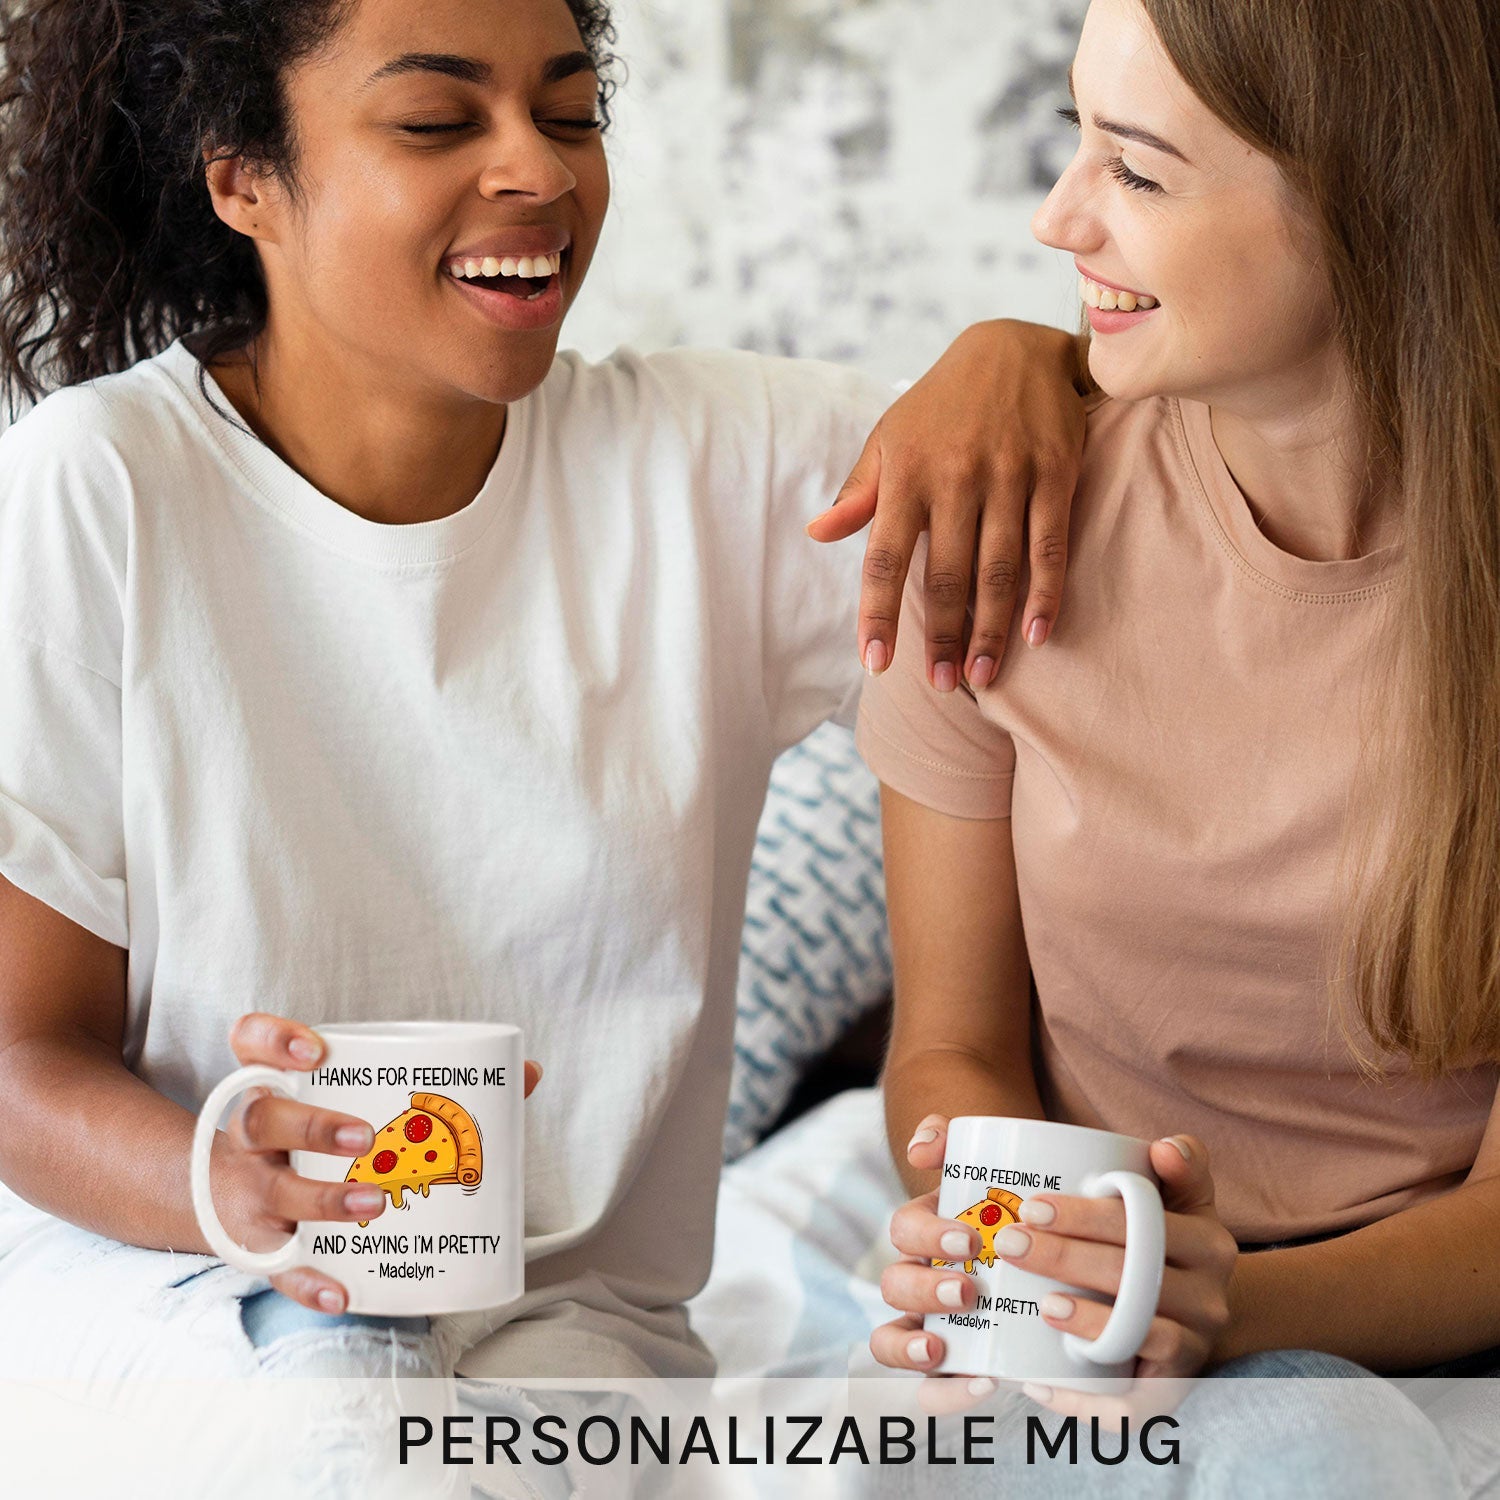 Thanks For Feeding Me - Personalized Anniversary or Valentine's Day gift for him for her - Custom Mug - MyMindfulGifts